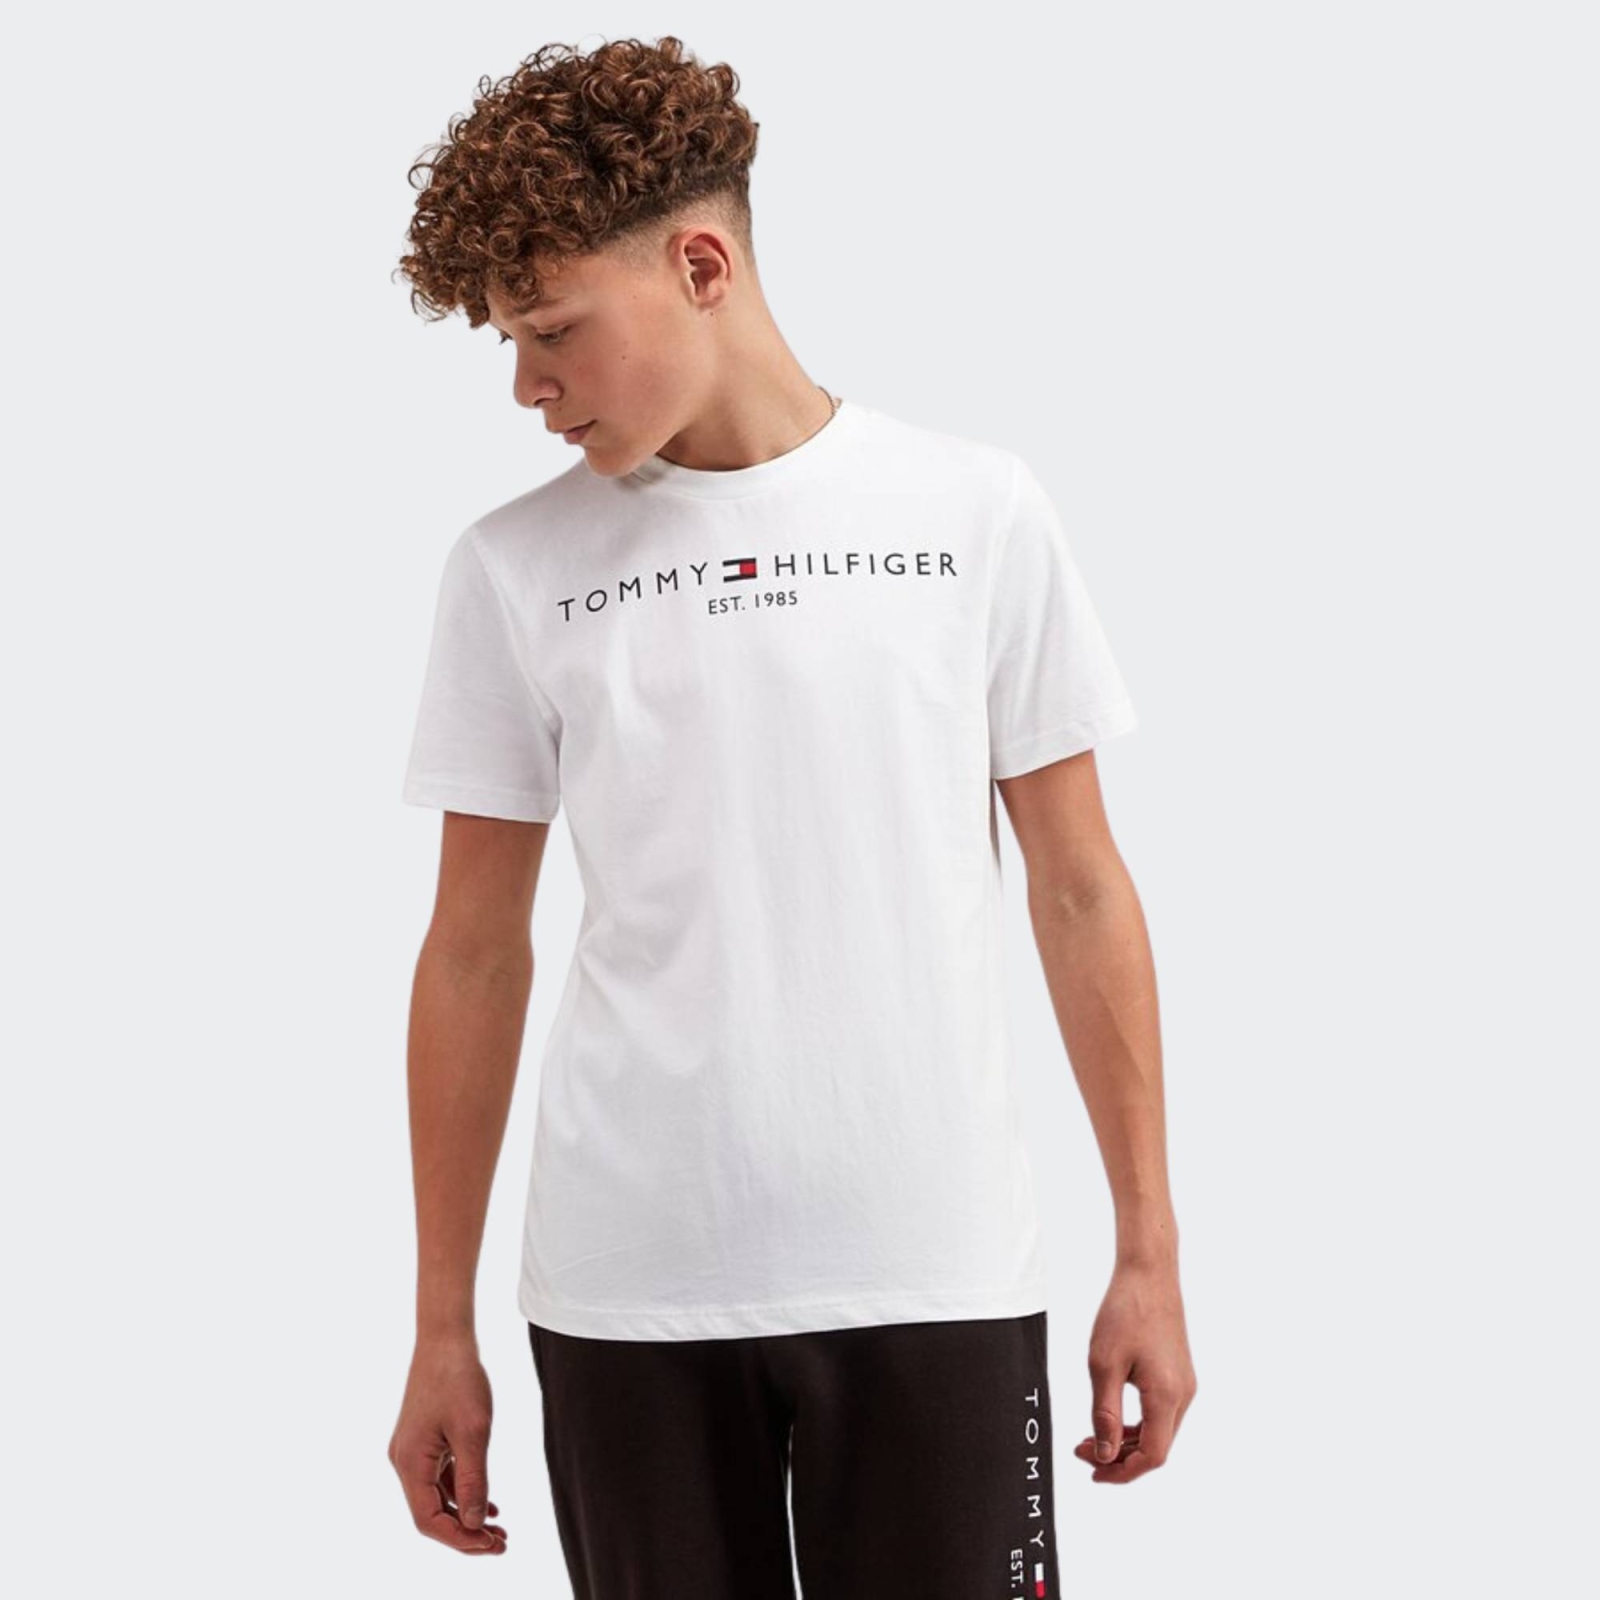 TOMMY ESSENTIAL TEE